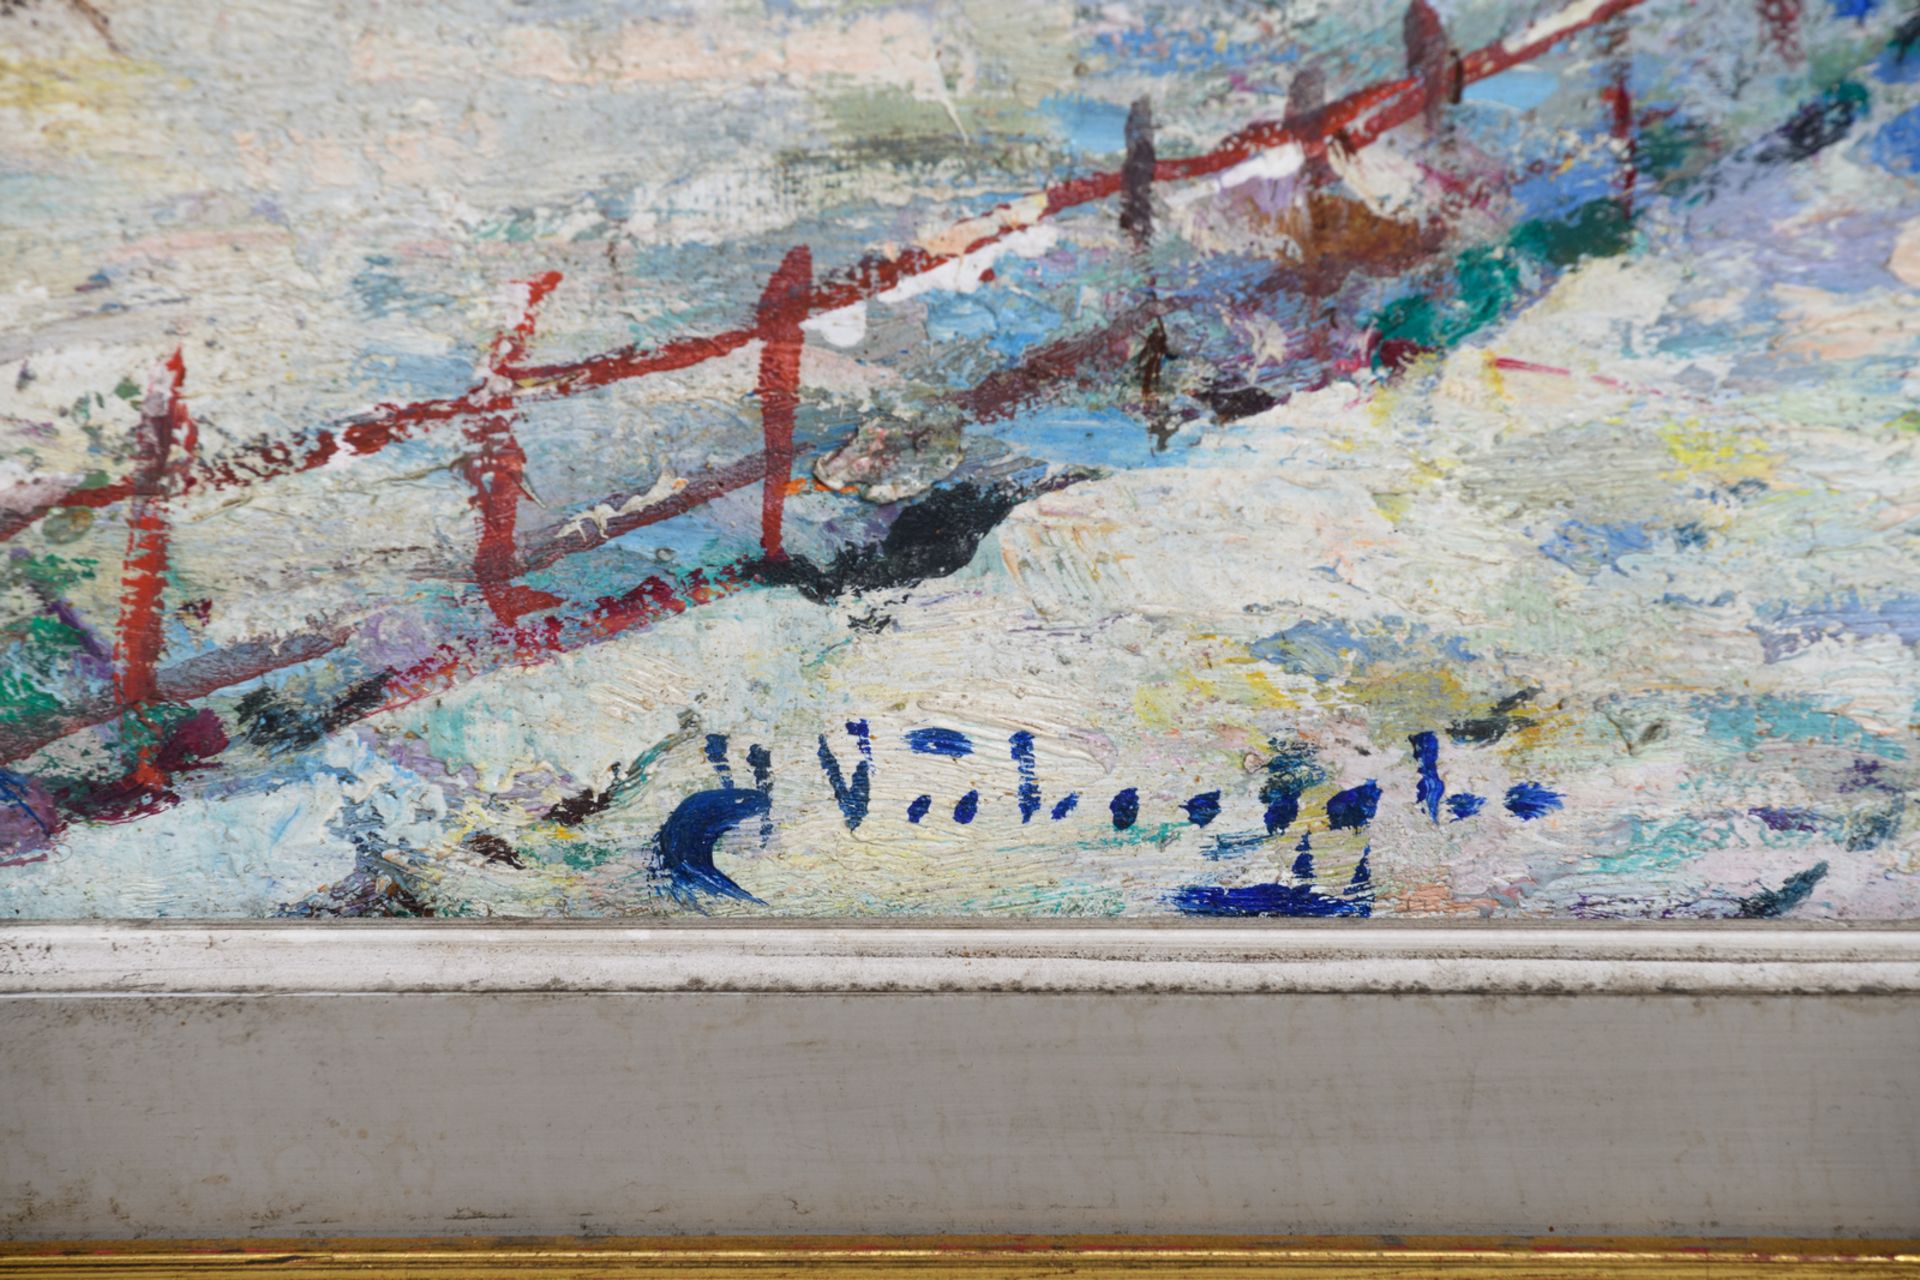 Verbrugghe C., 'Paysage D'Hyver' and a winter landscape, oil on board, 15 x 31 and 37,5 x 54,5 cm - Image 5 of 6